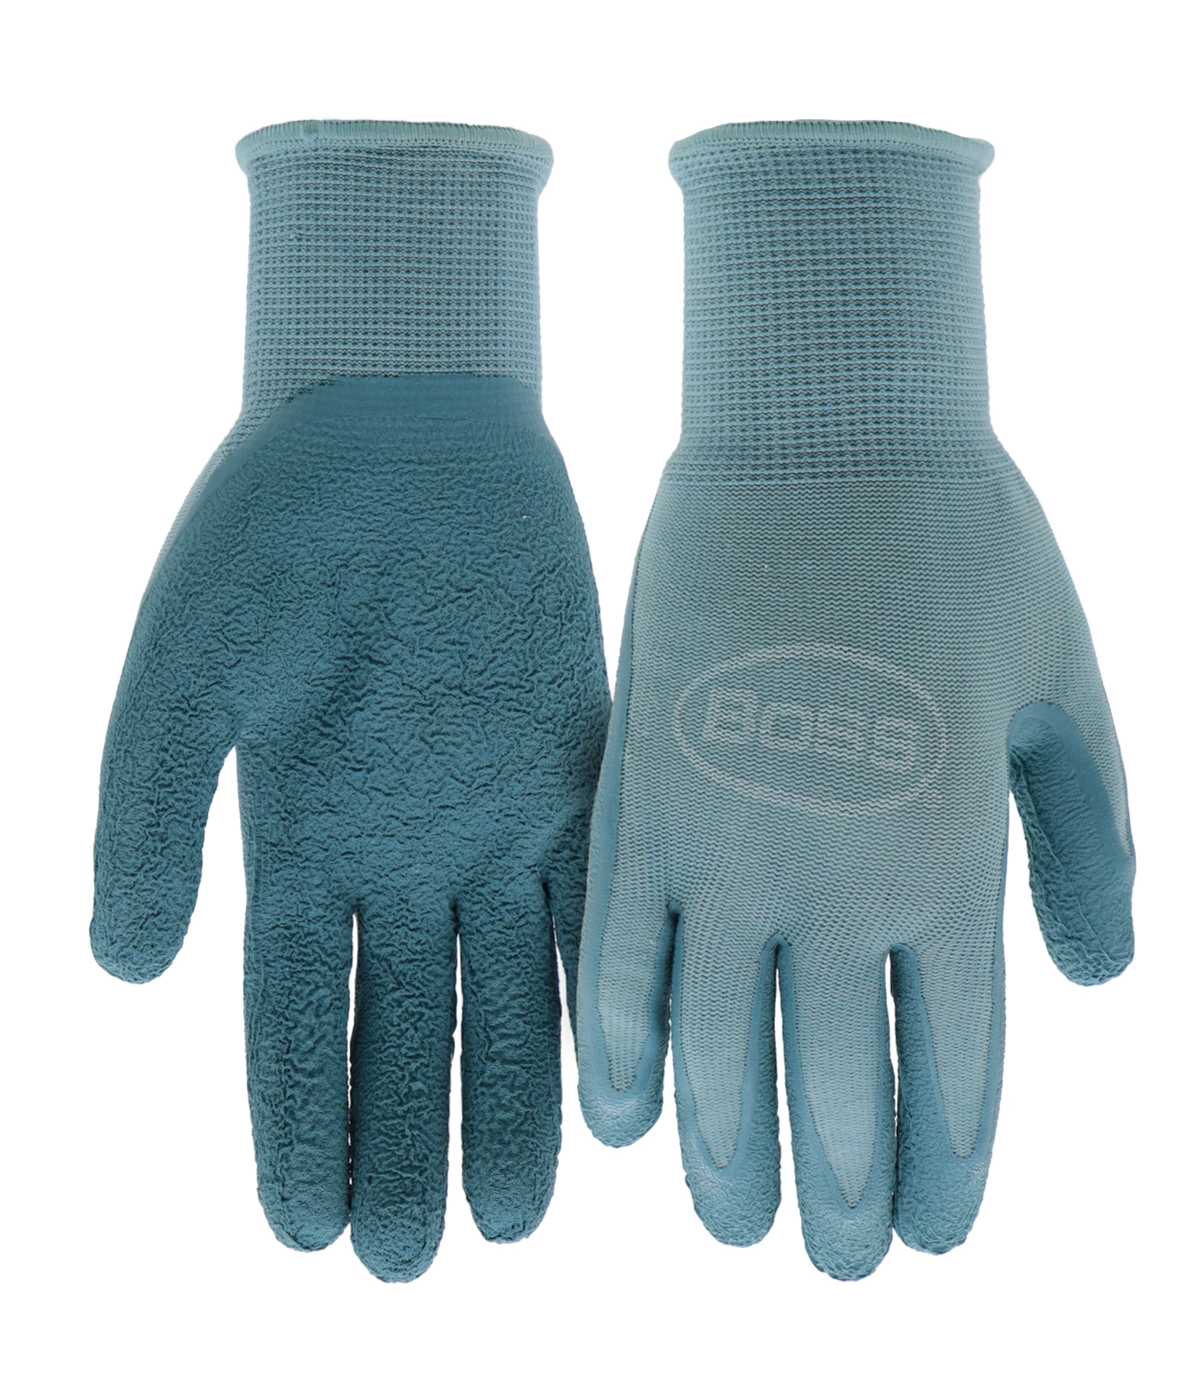 Boss 2 Women's Tactile Grip Latex Gloves; image 2 of 3